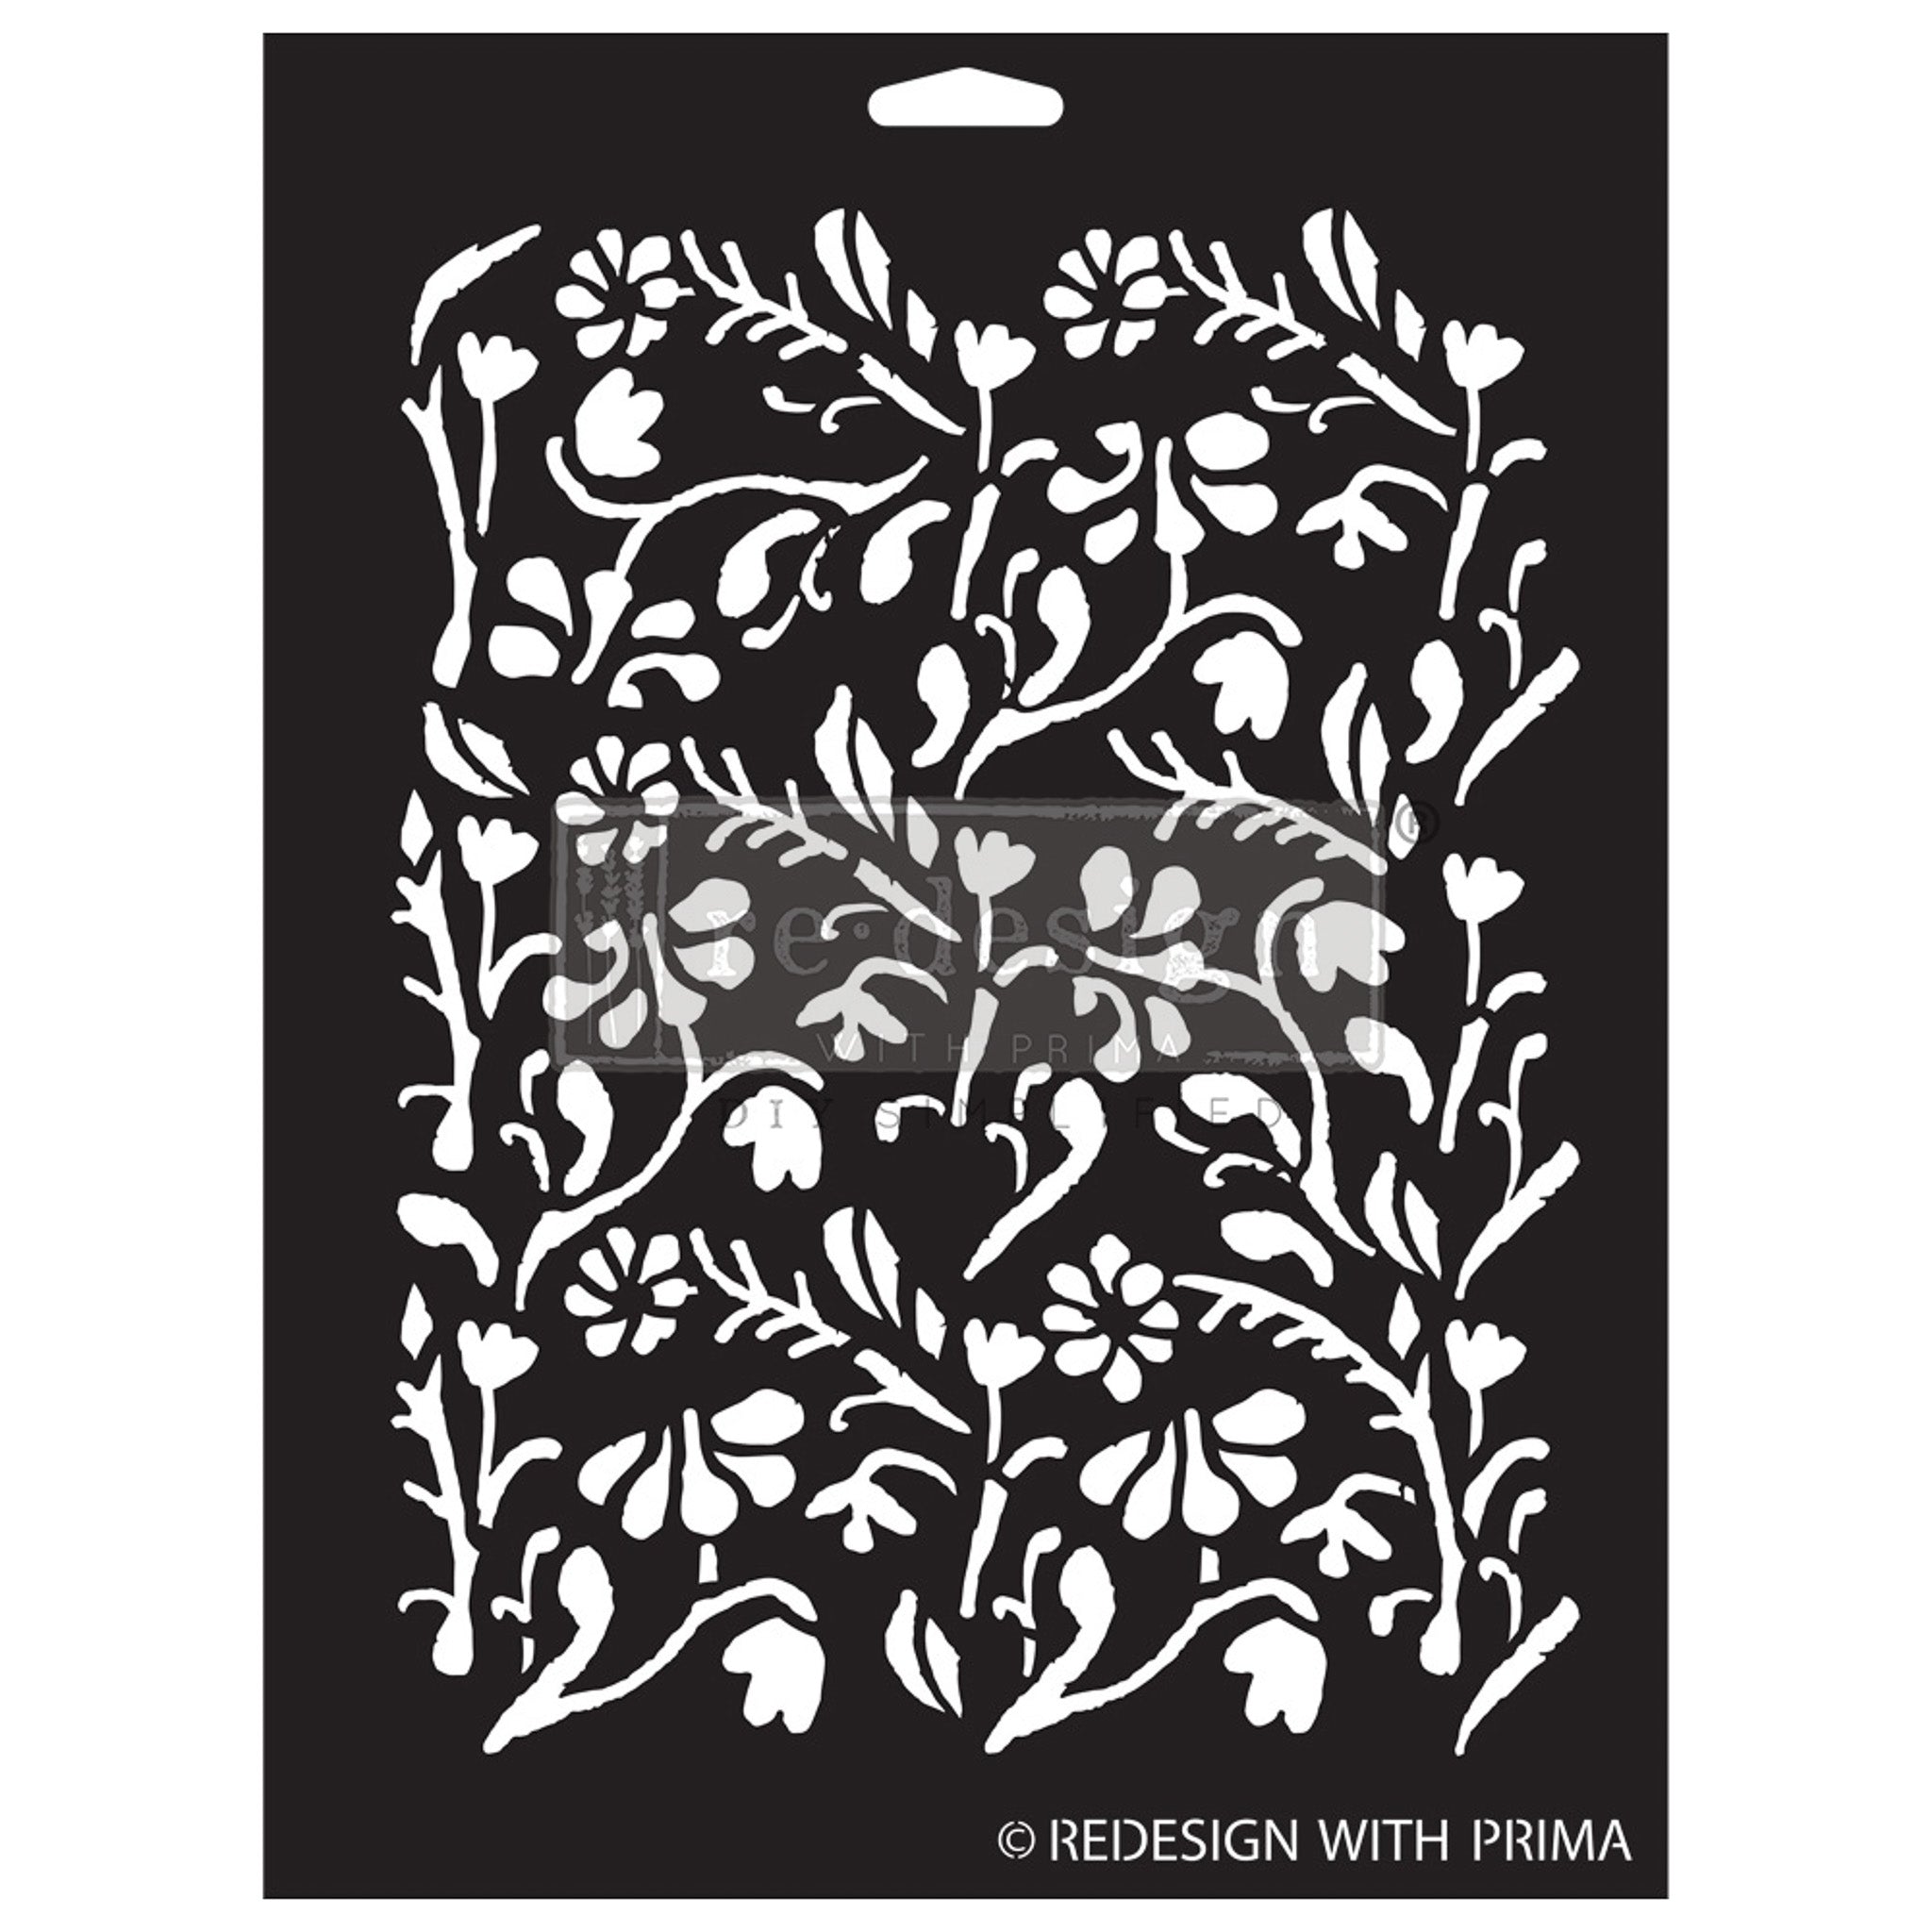 A black stencil against a white background that features a dainty floral design.